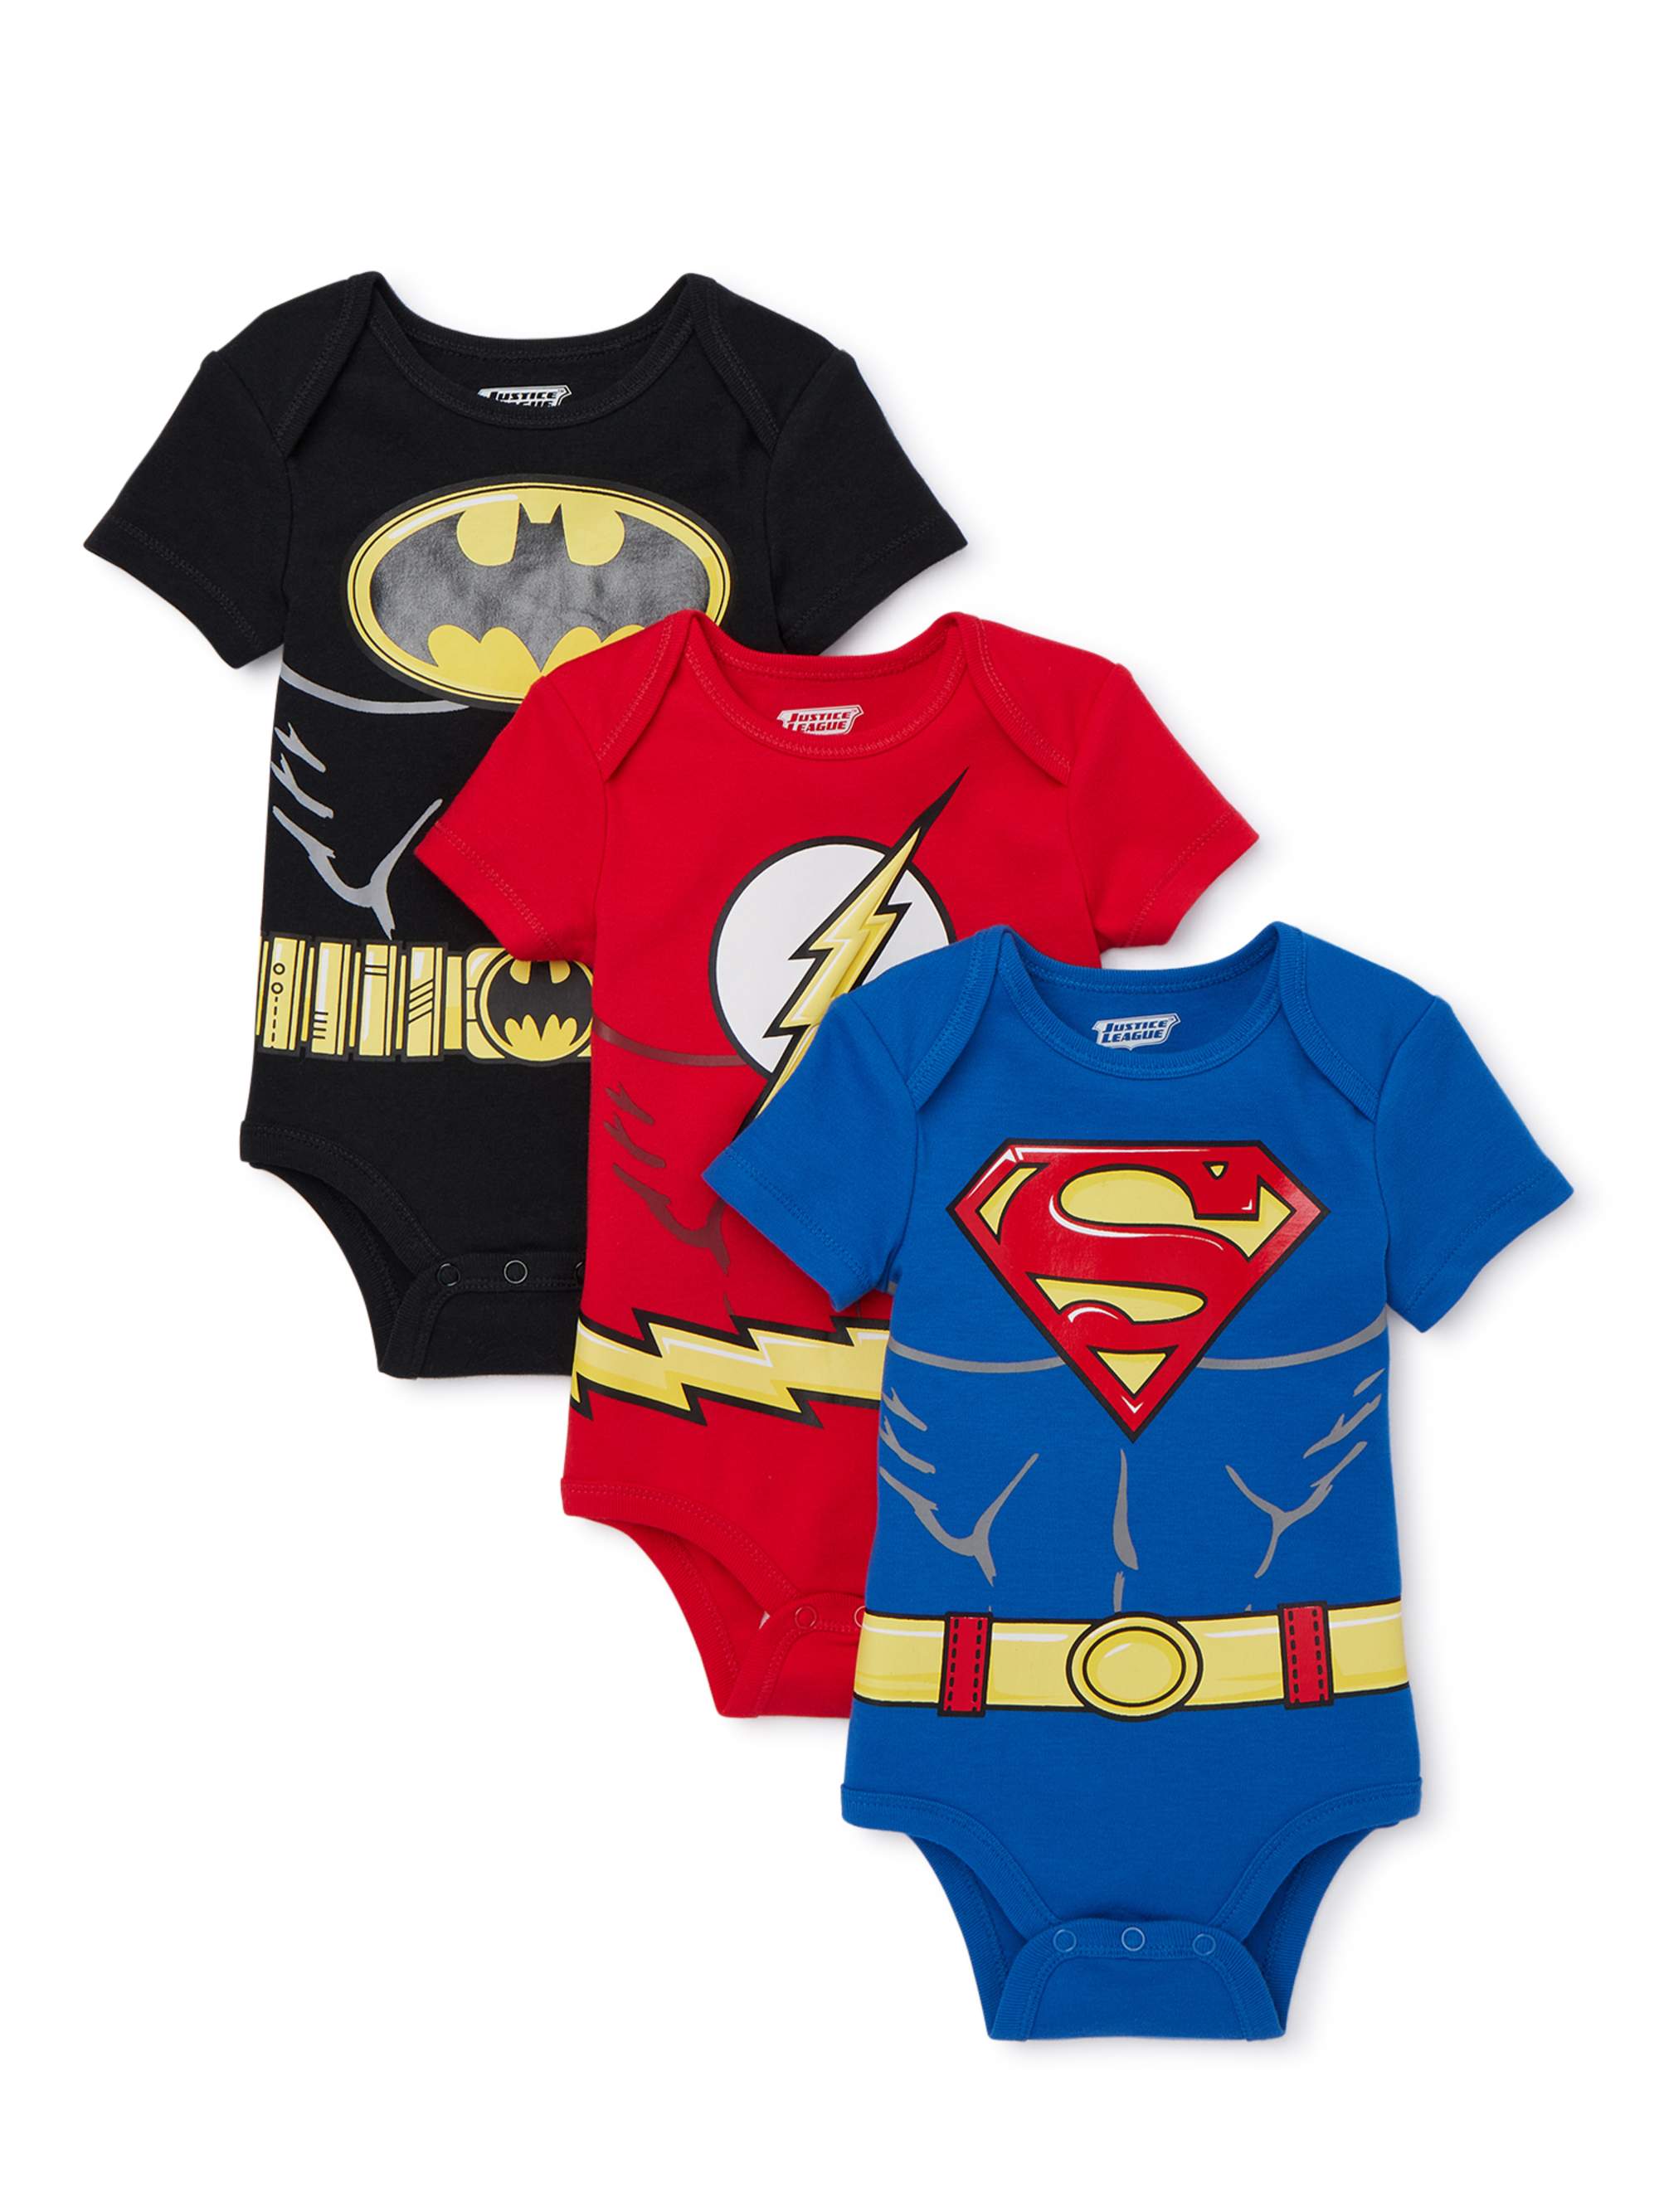 Justice League Baby Boy Short Sleeve Bodysuits, 3-Pack - image 1 of 7